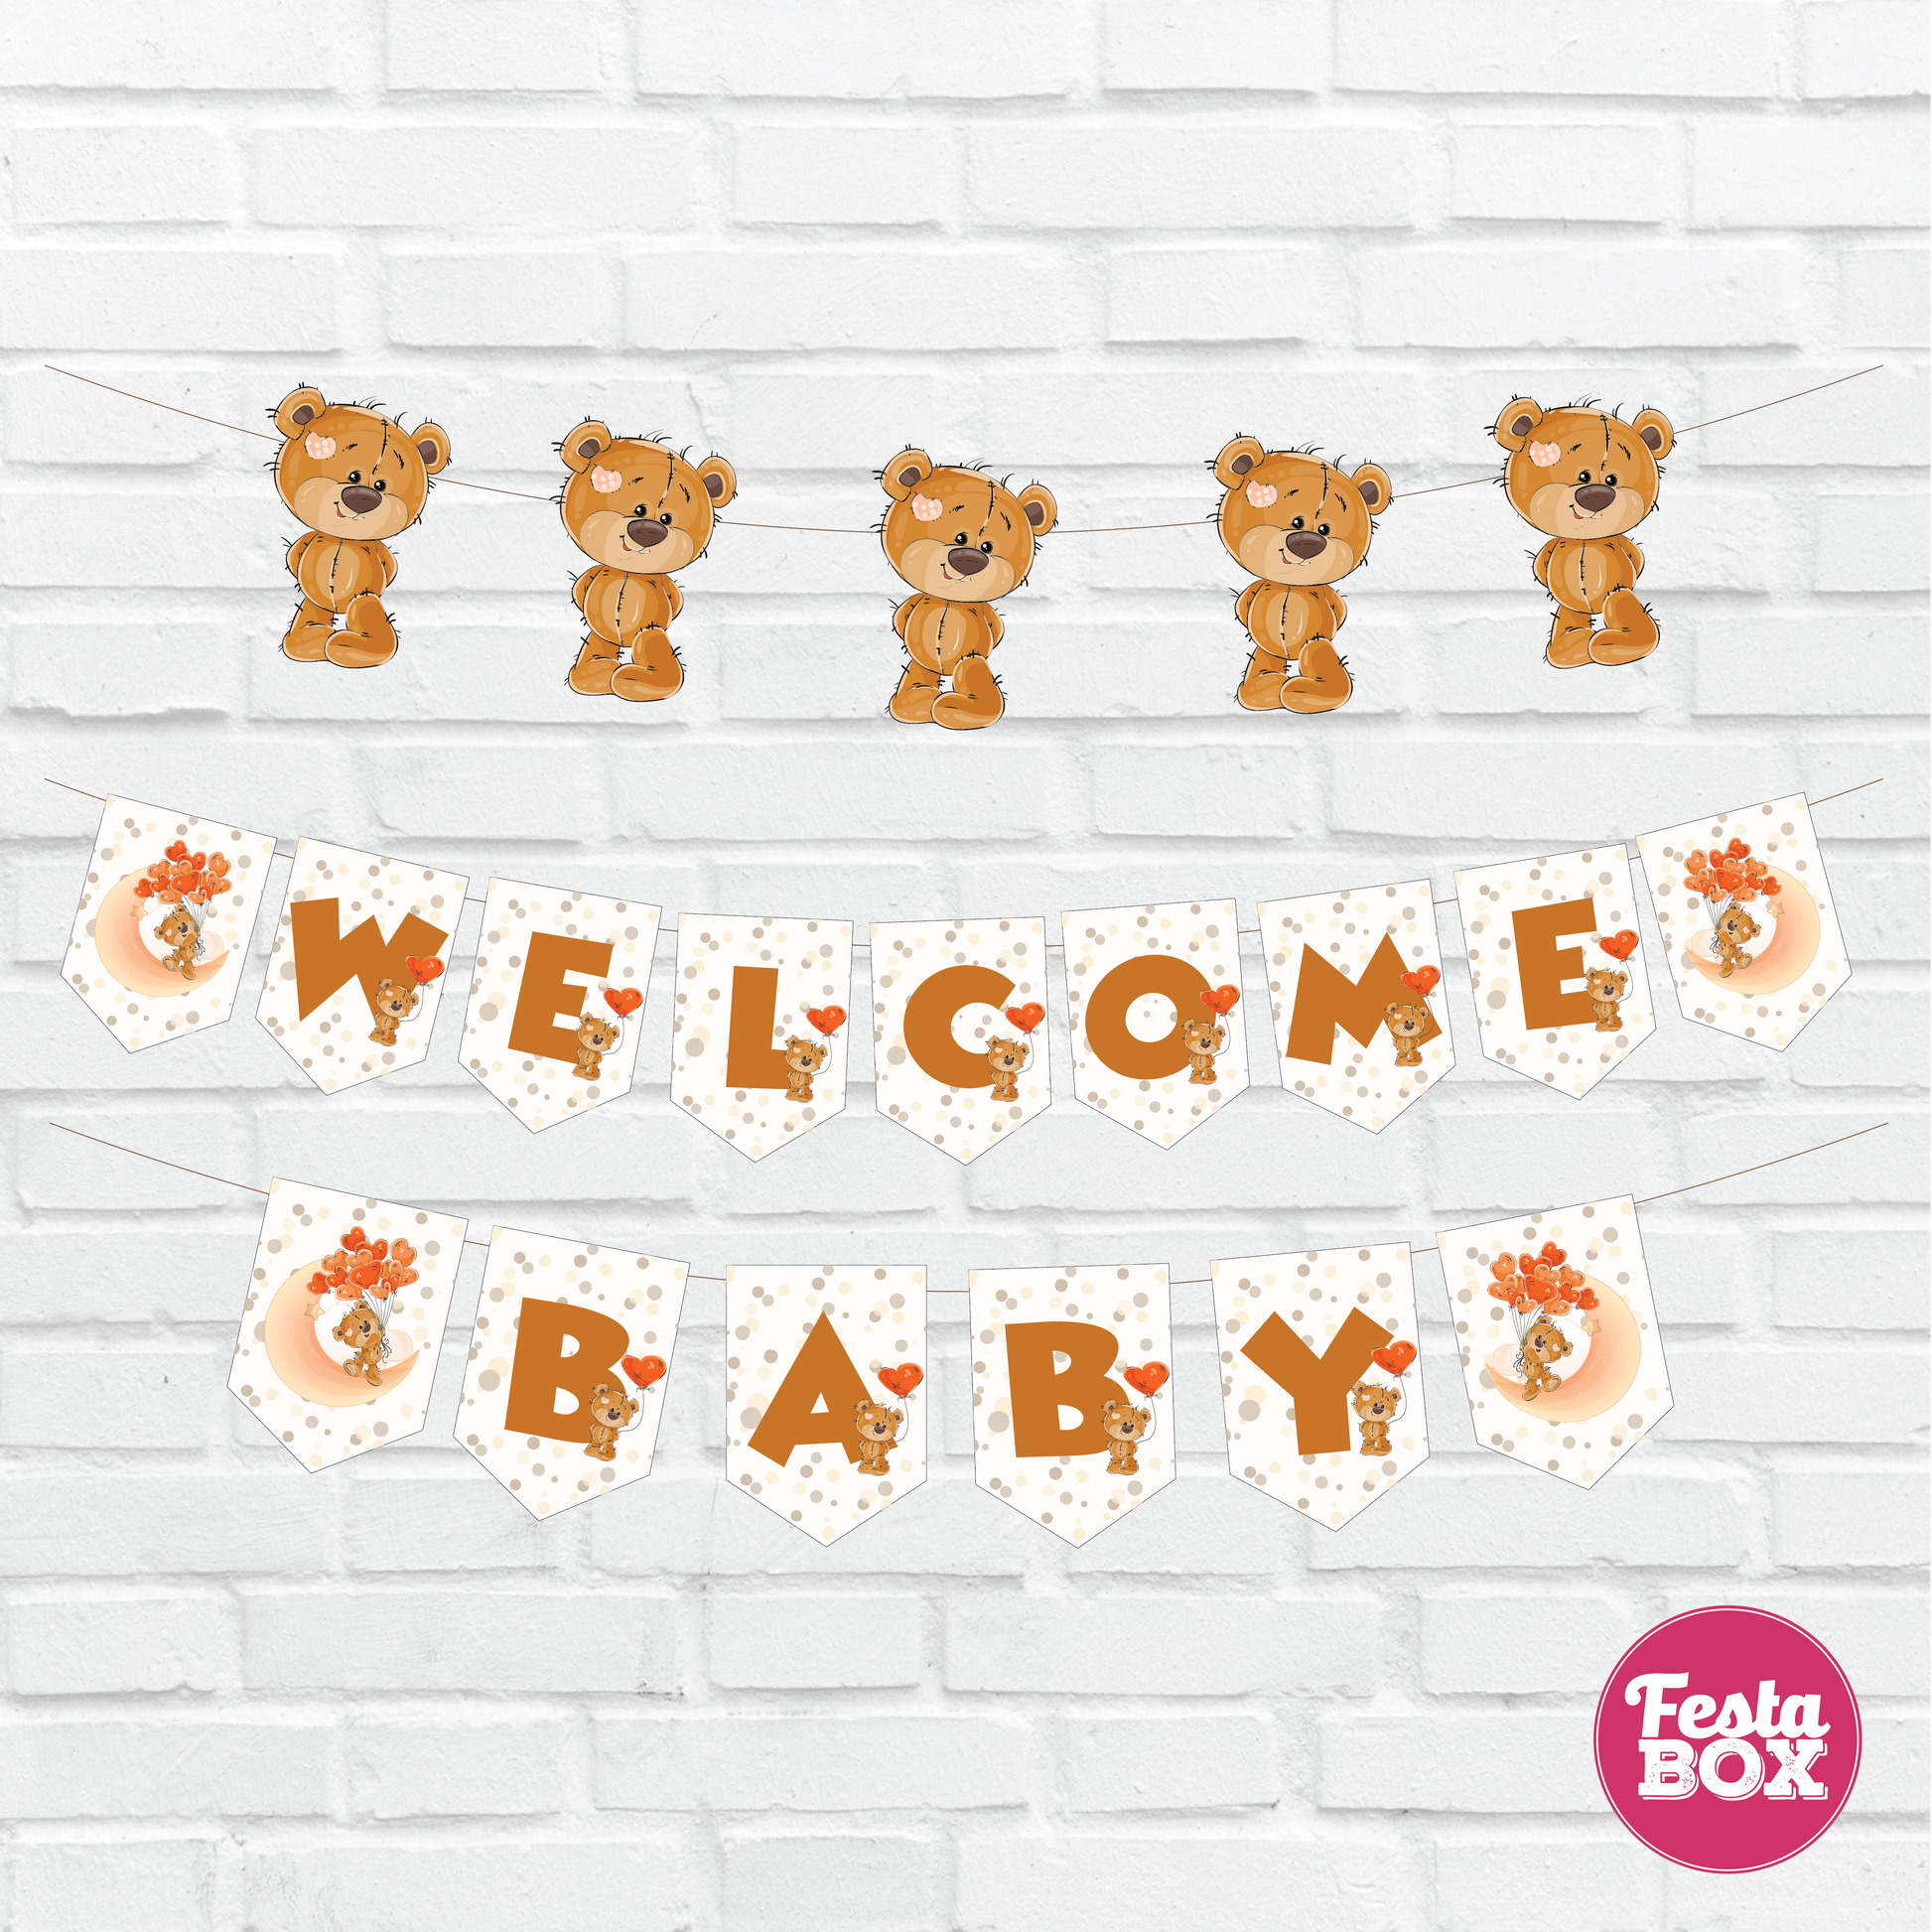 Background Banner under the Teddy Bear Collection by Festabox